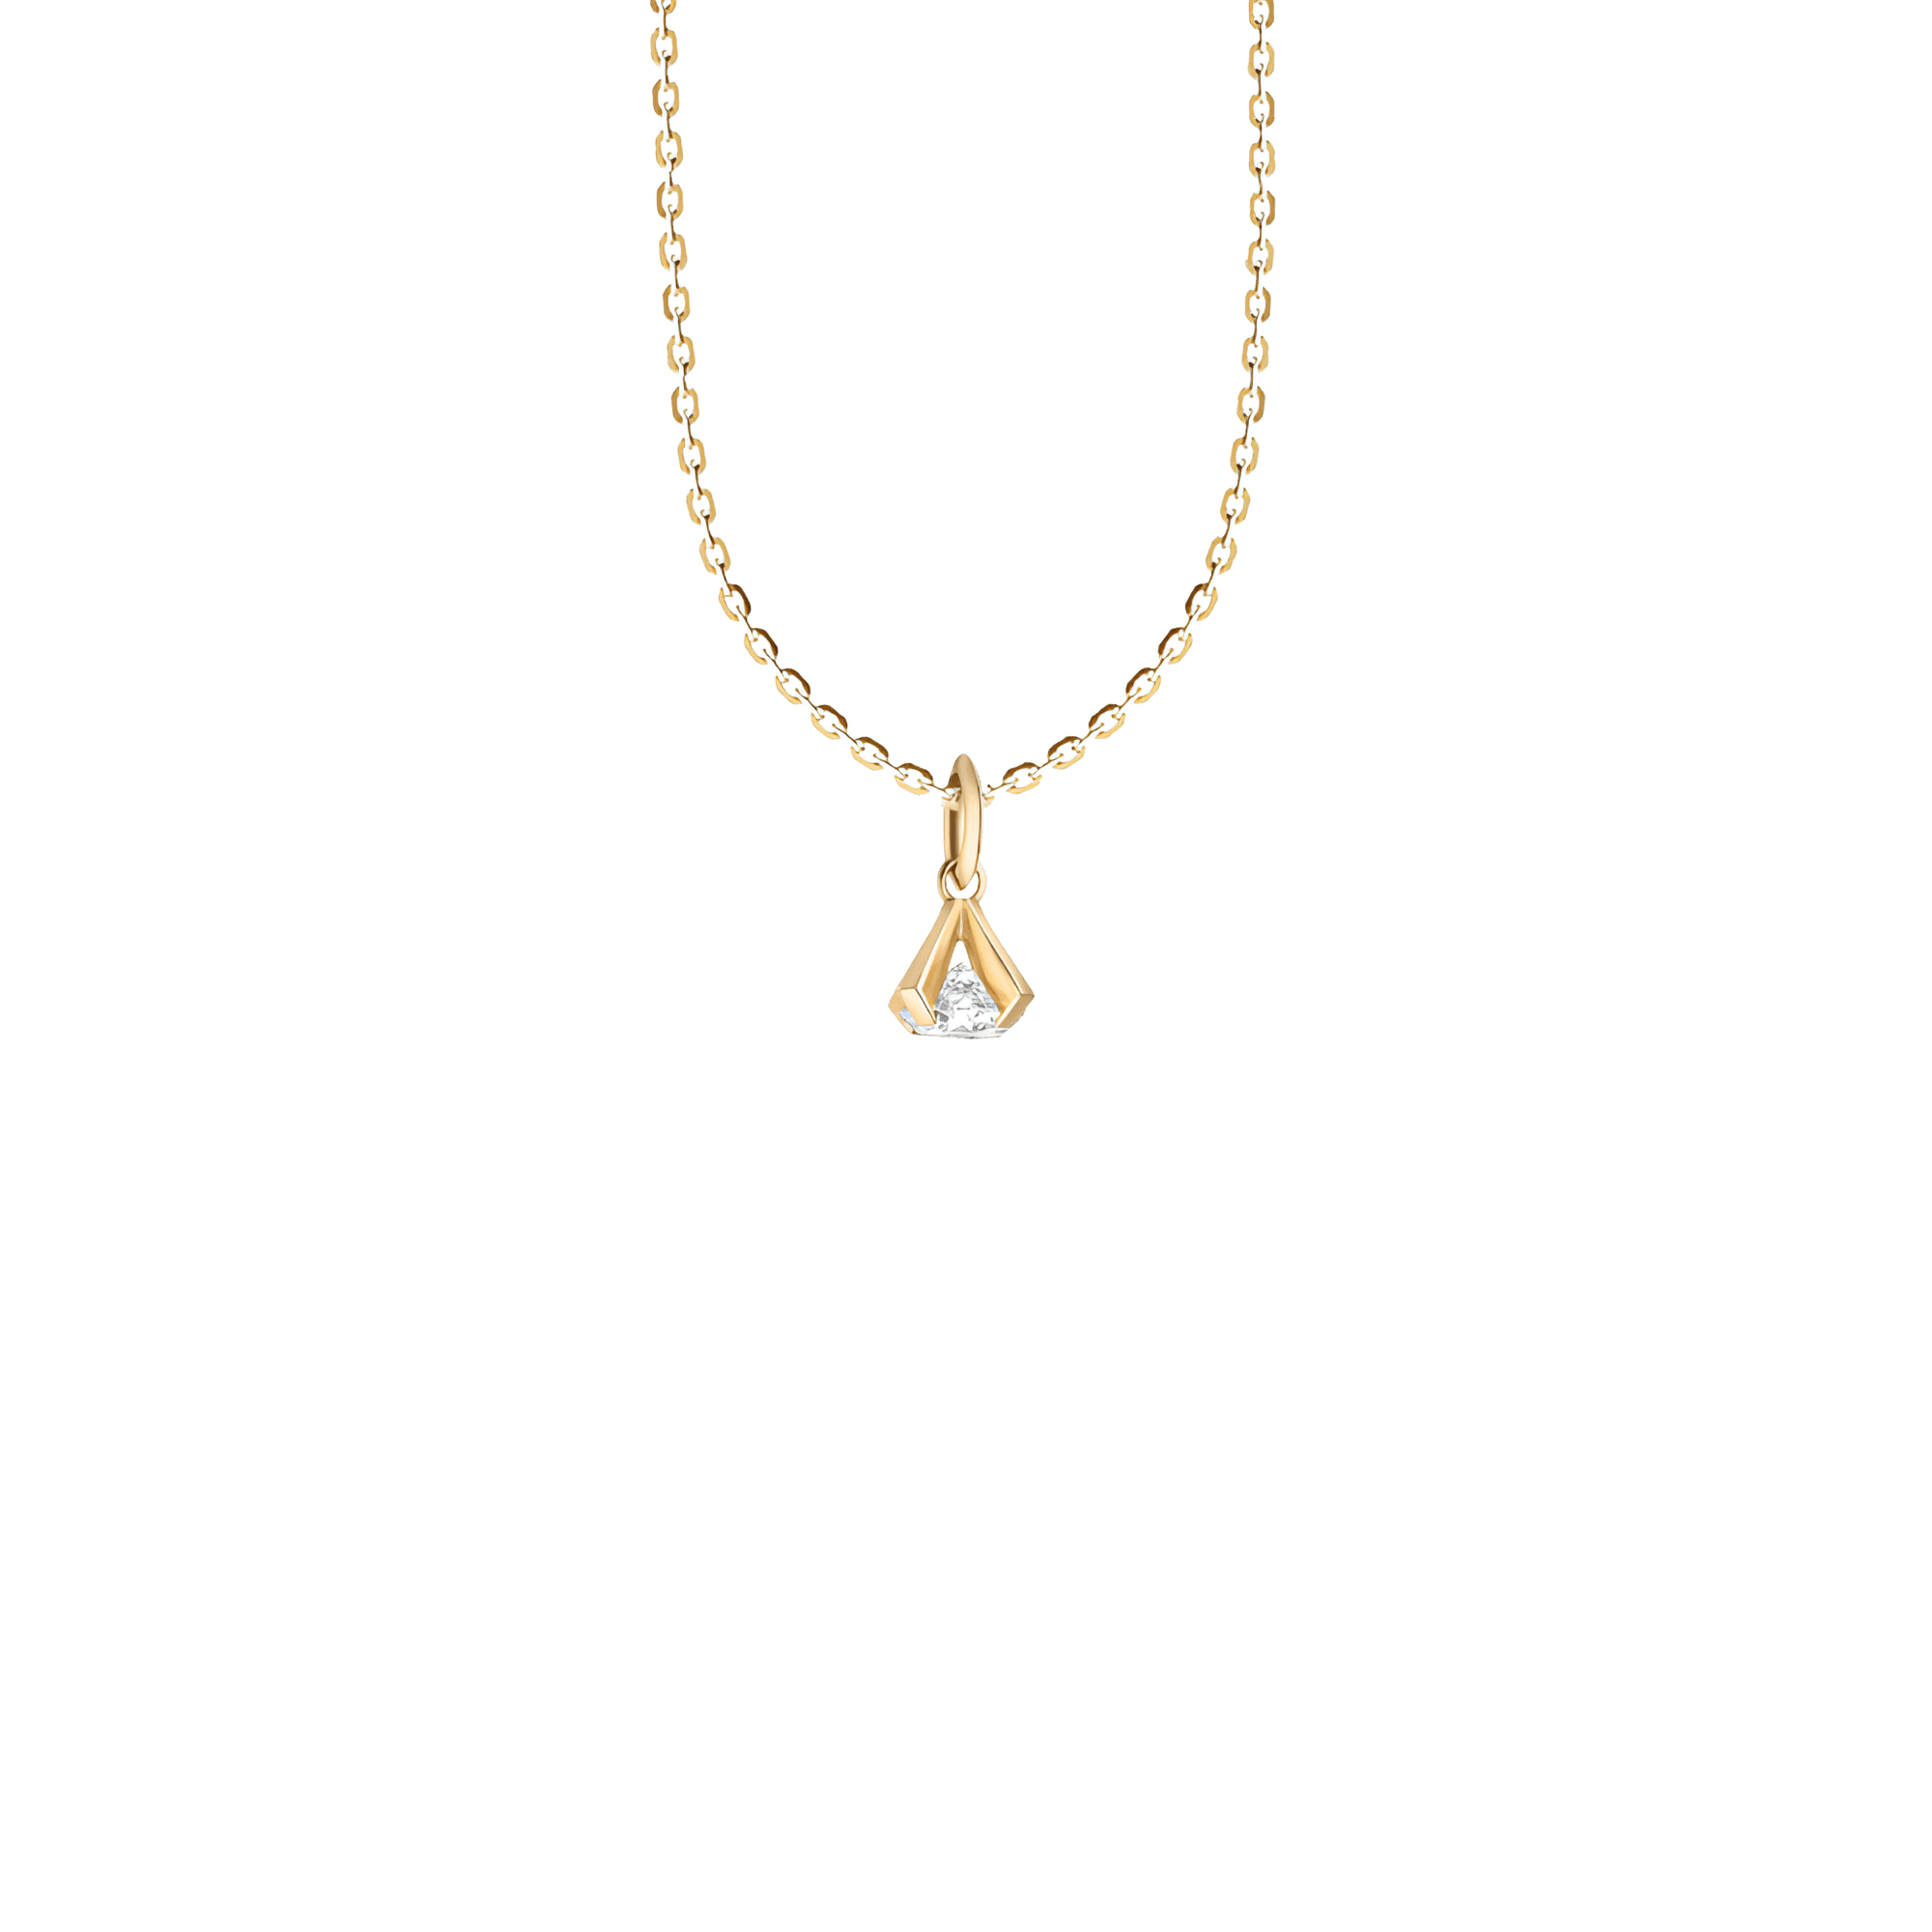 ReMind 18K Gold Lab-Grown Diamond Pendant Necklace | 18K yellow gold / Chain length 420mm / 16.5in / 0.53  | Jewelry | The Future Rocks